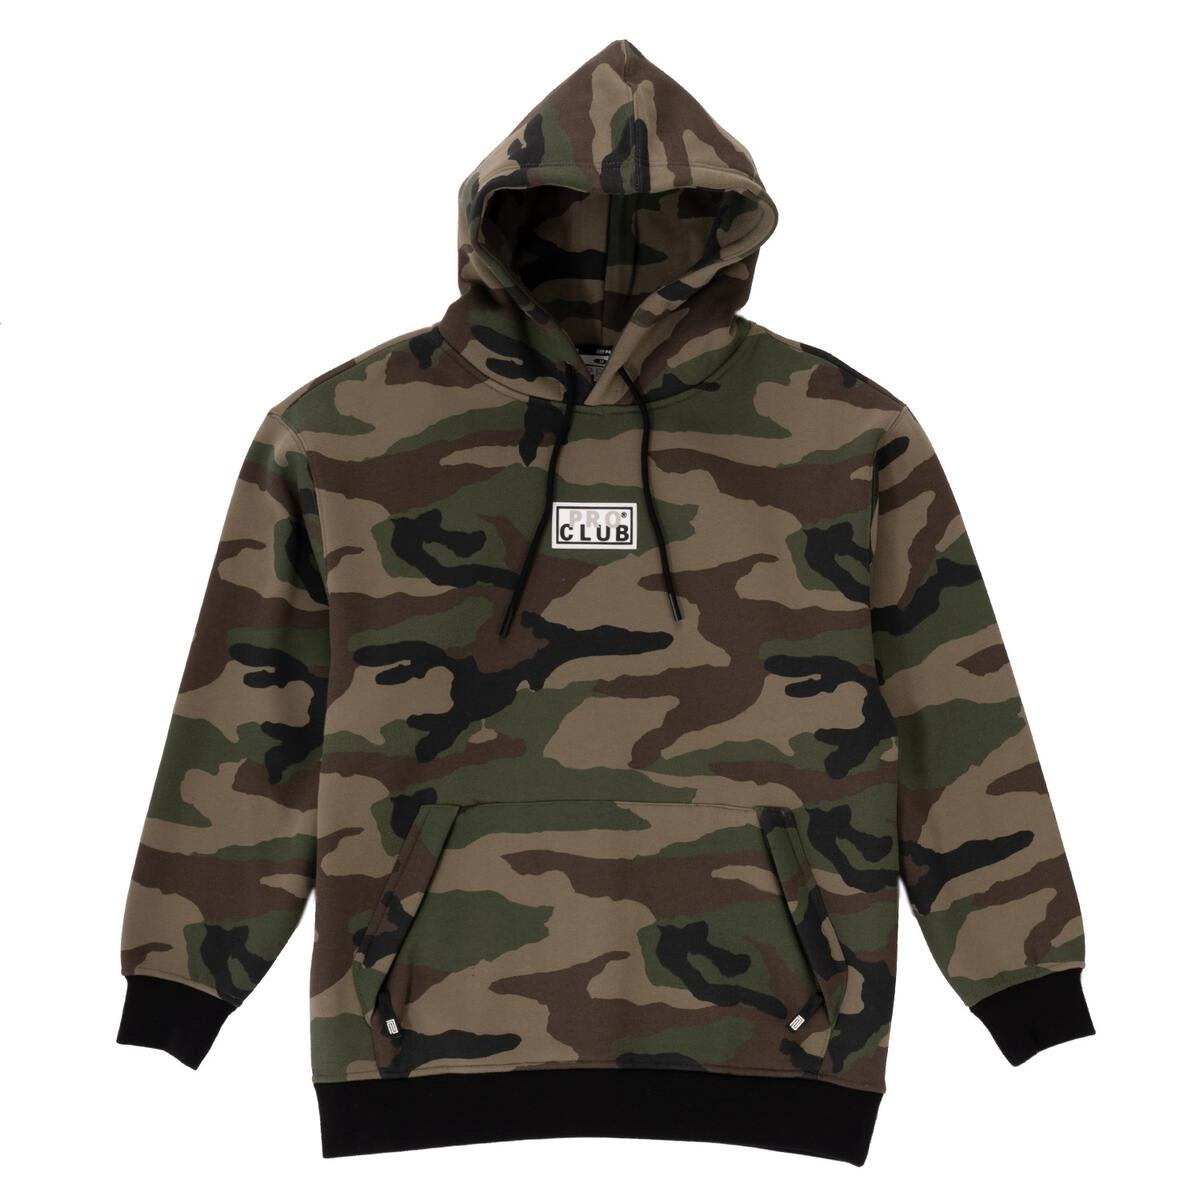 Pro Club Men's Heavyweight Silicone Patch Pullover Hoodie - Green Camo